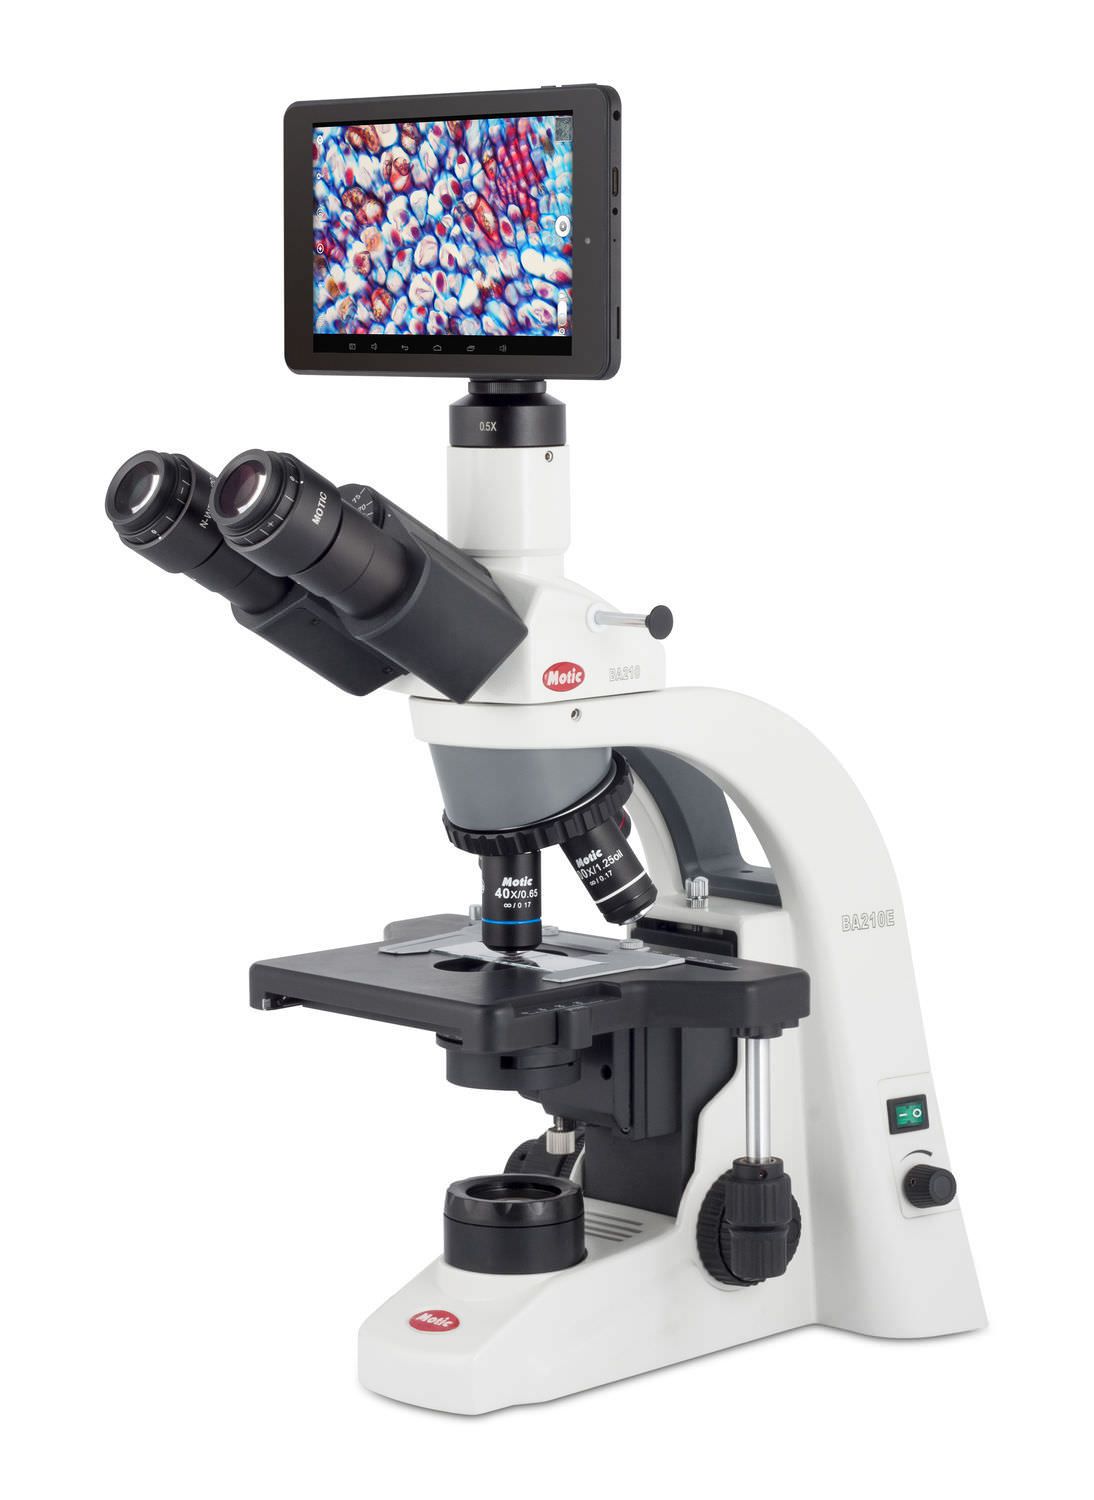 Digital camera / for laboratory microscopes / CMOS / touchscreen tablet 7'' | Moticam S2 Motic Europe